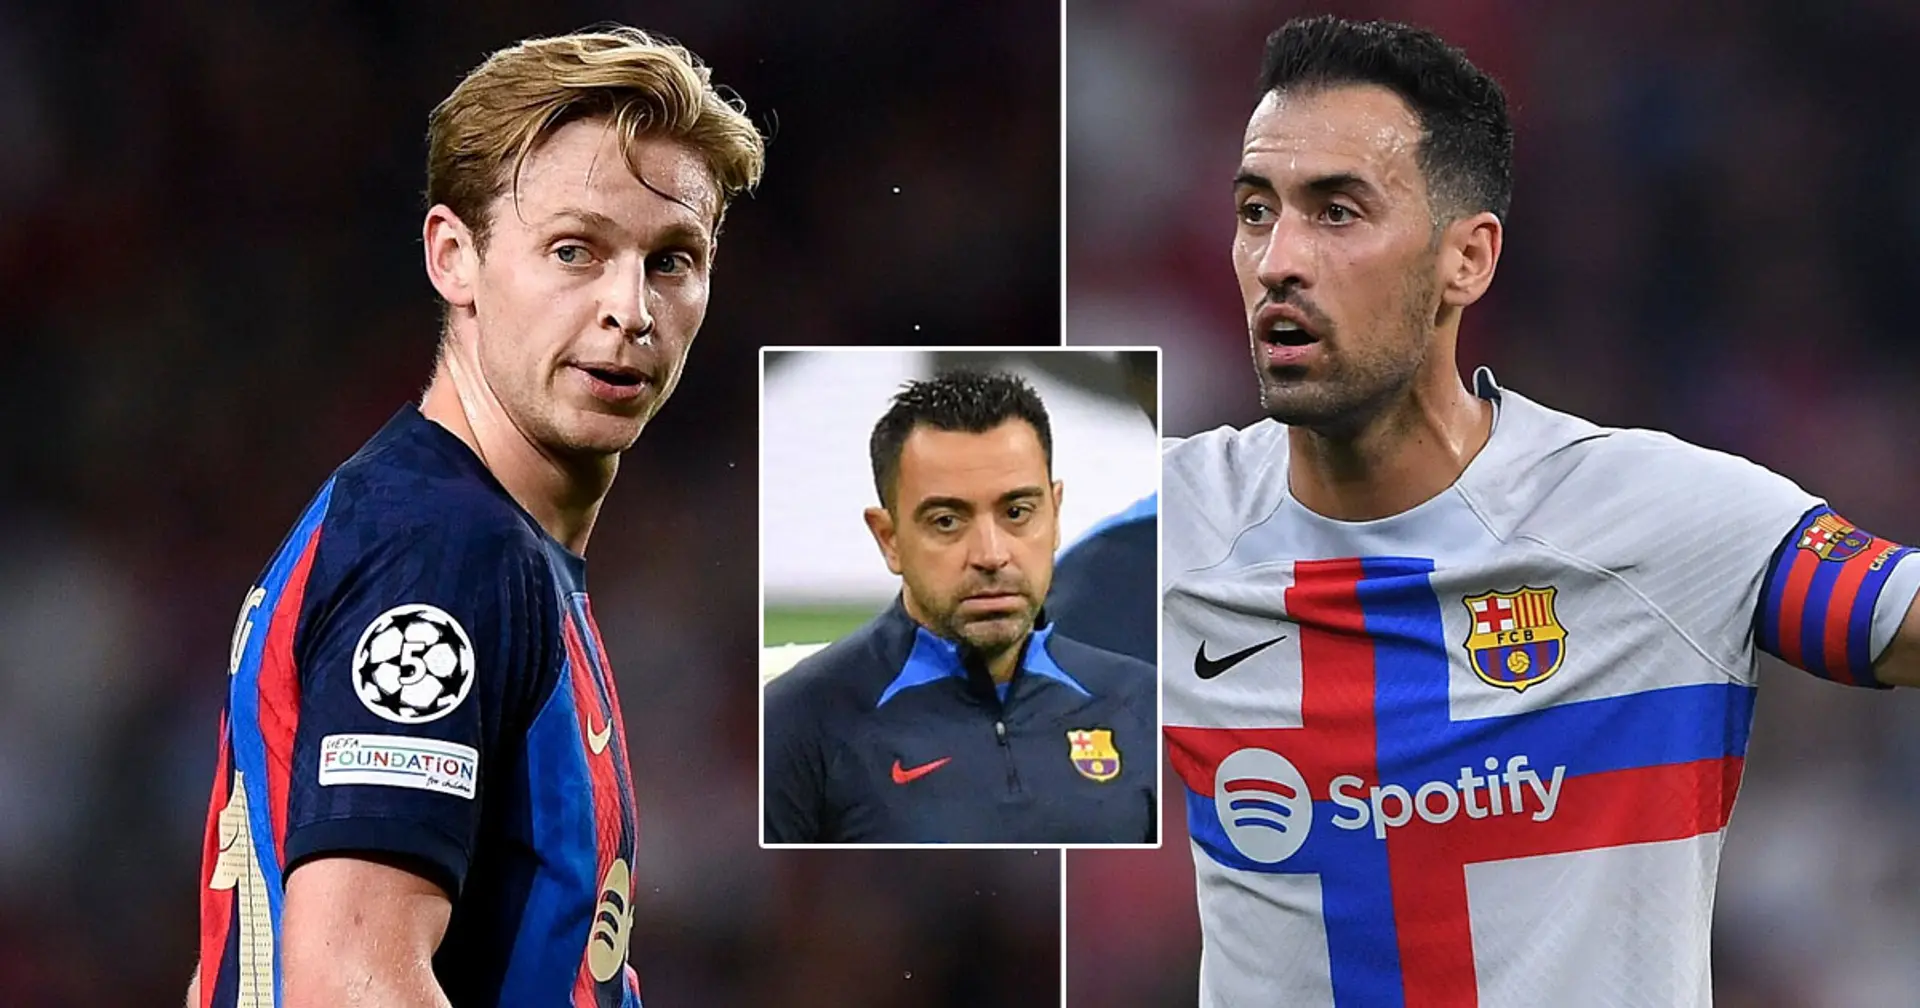 Xavi 'changes opinion' on De Jong after playing him in Busquets spot